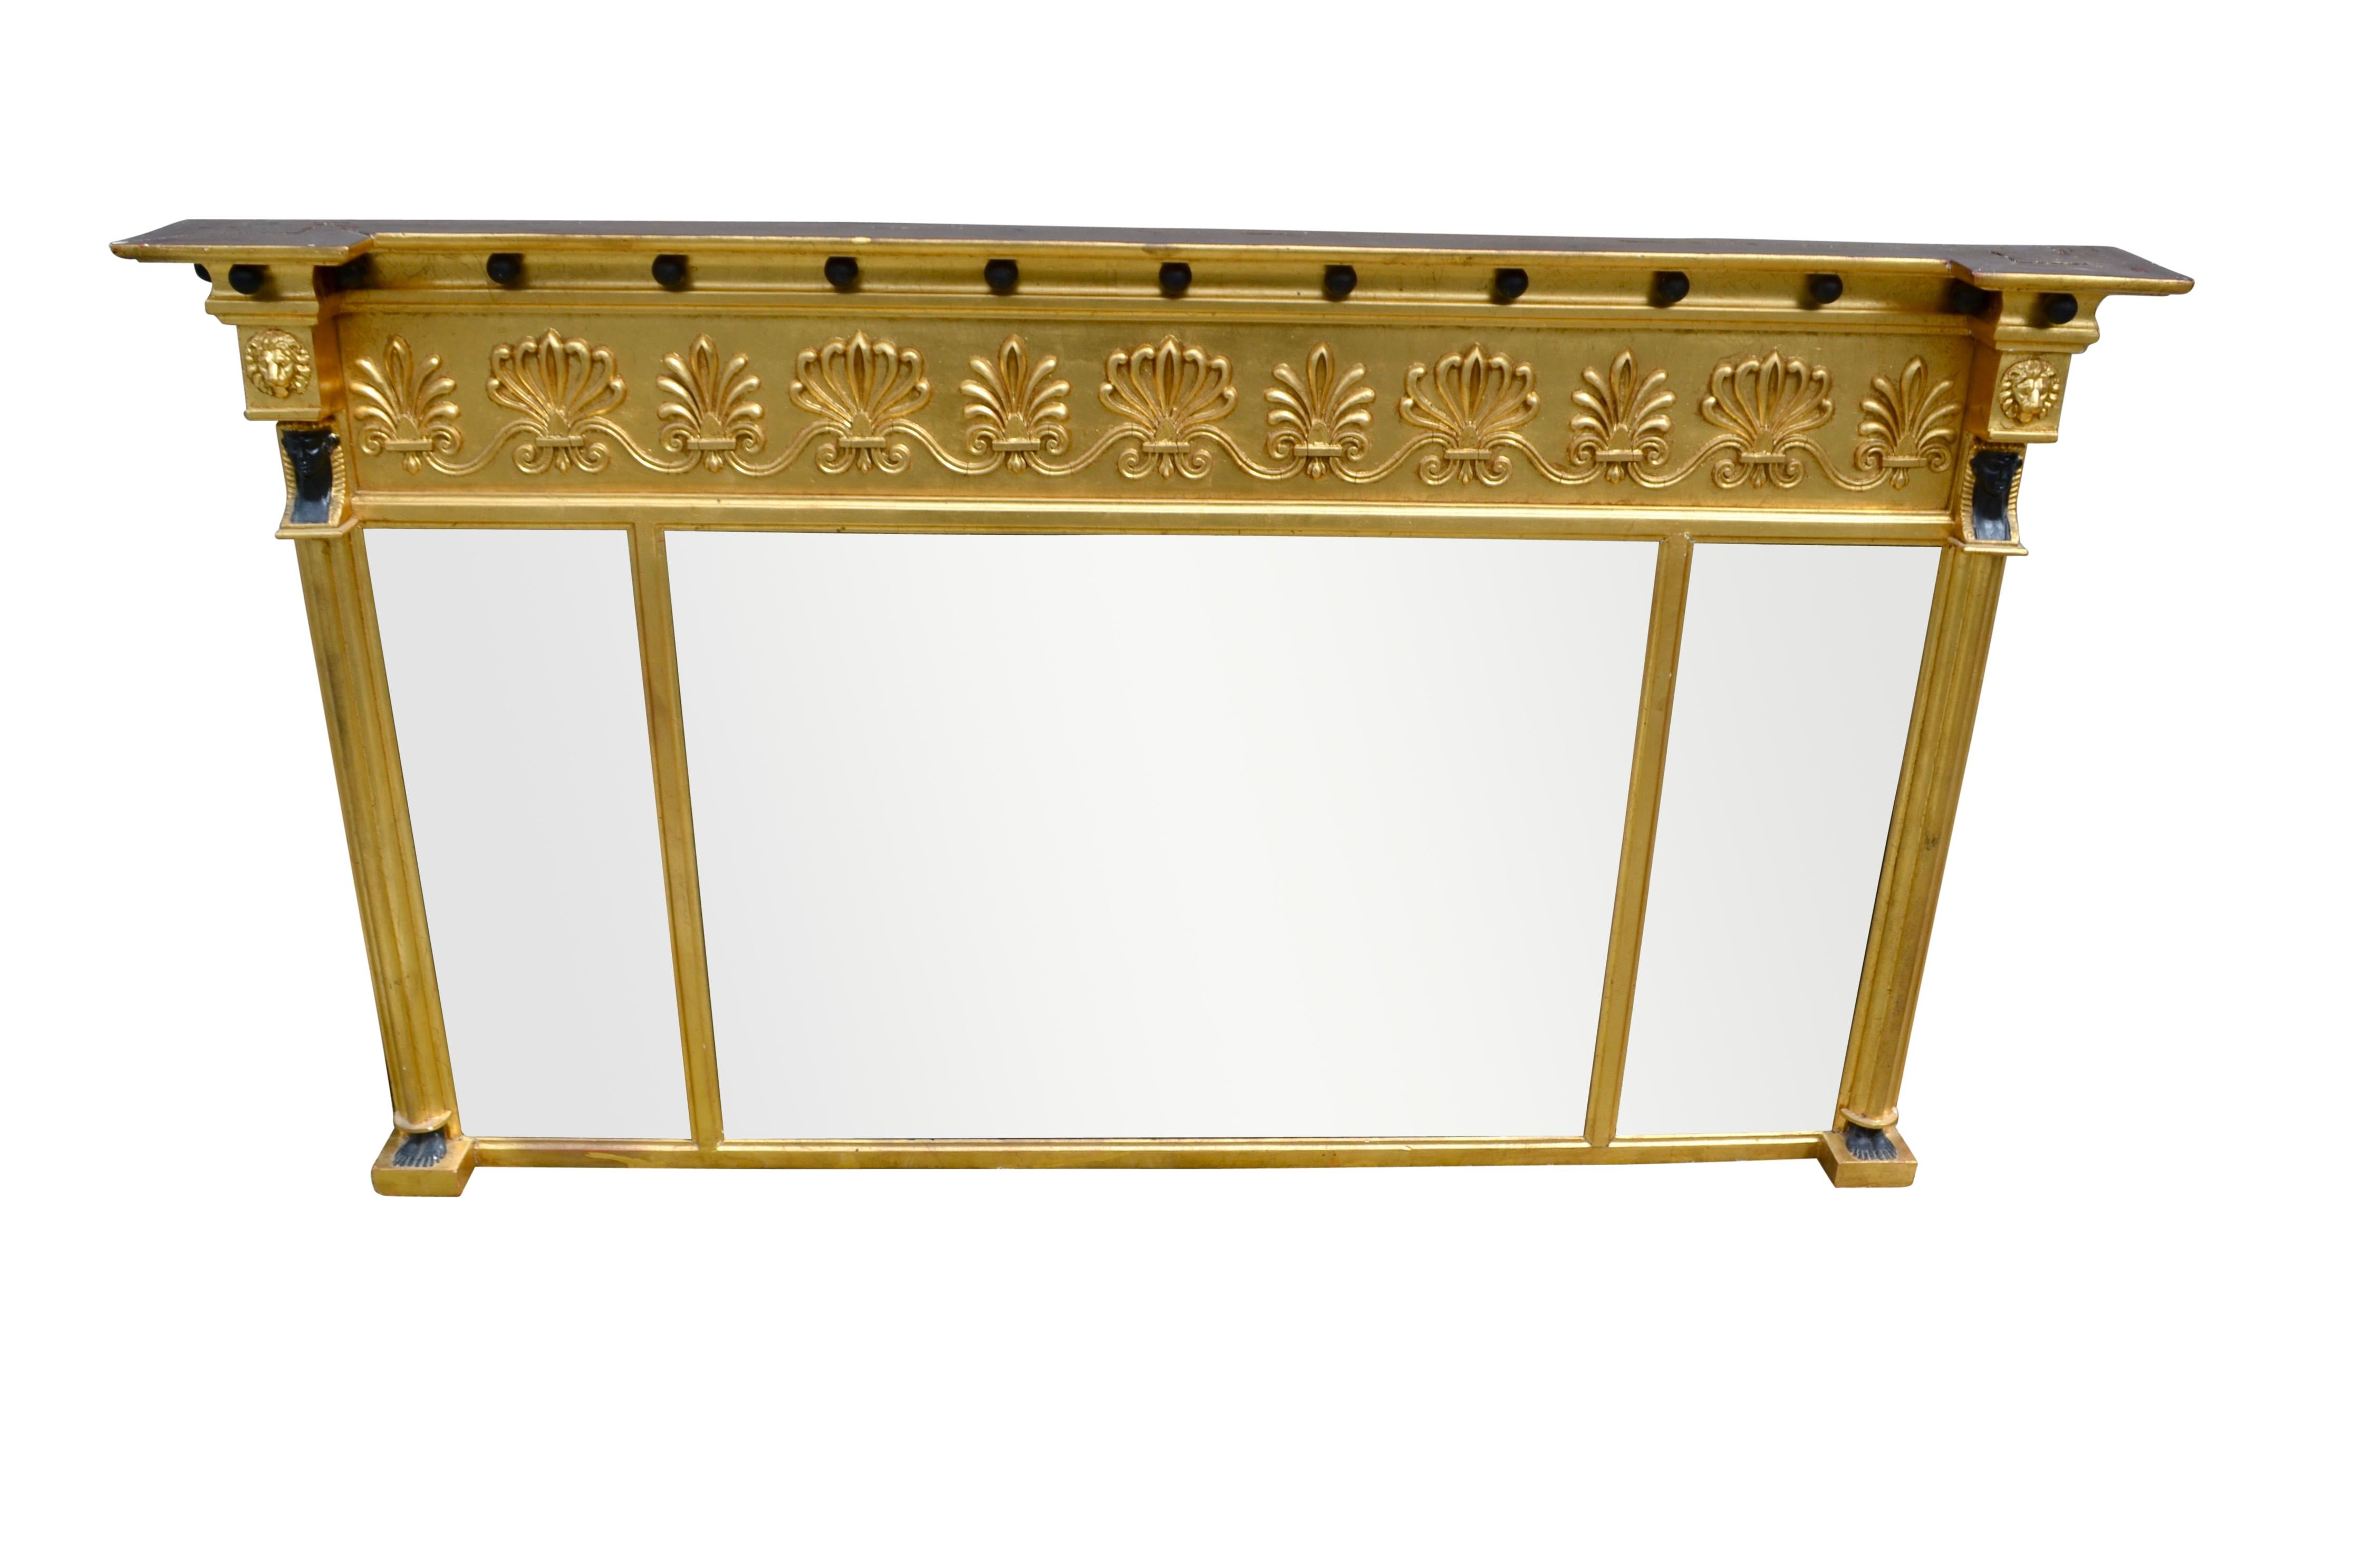 A fine Regency giltwood and composition triple plate overmantel mirror, each mirror being beveled. The frieze is decorated with ebonized balls above alternating acanthus and anthemions. On each side of the mirror frame there is a fluted column